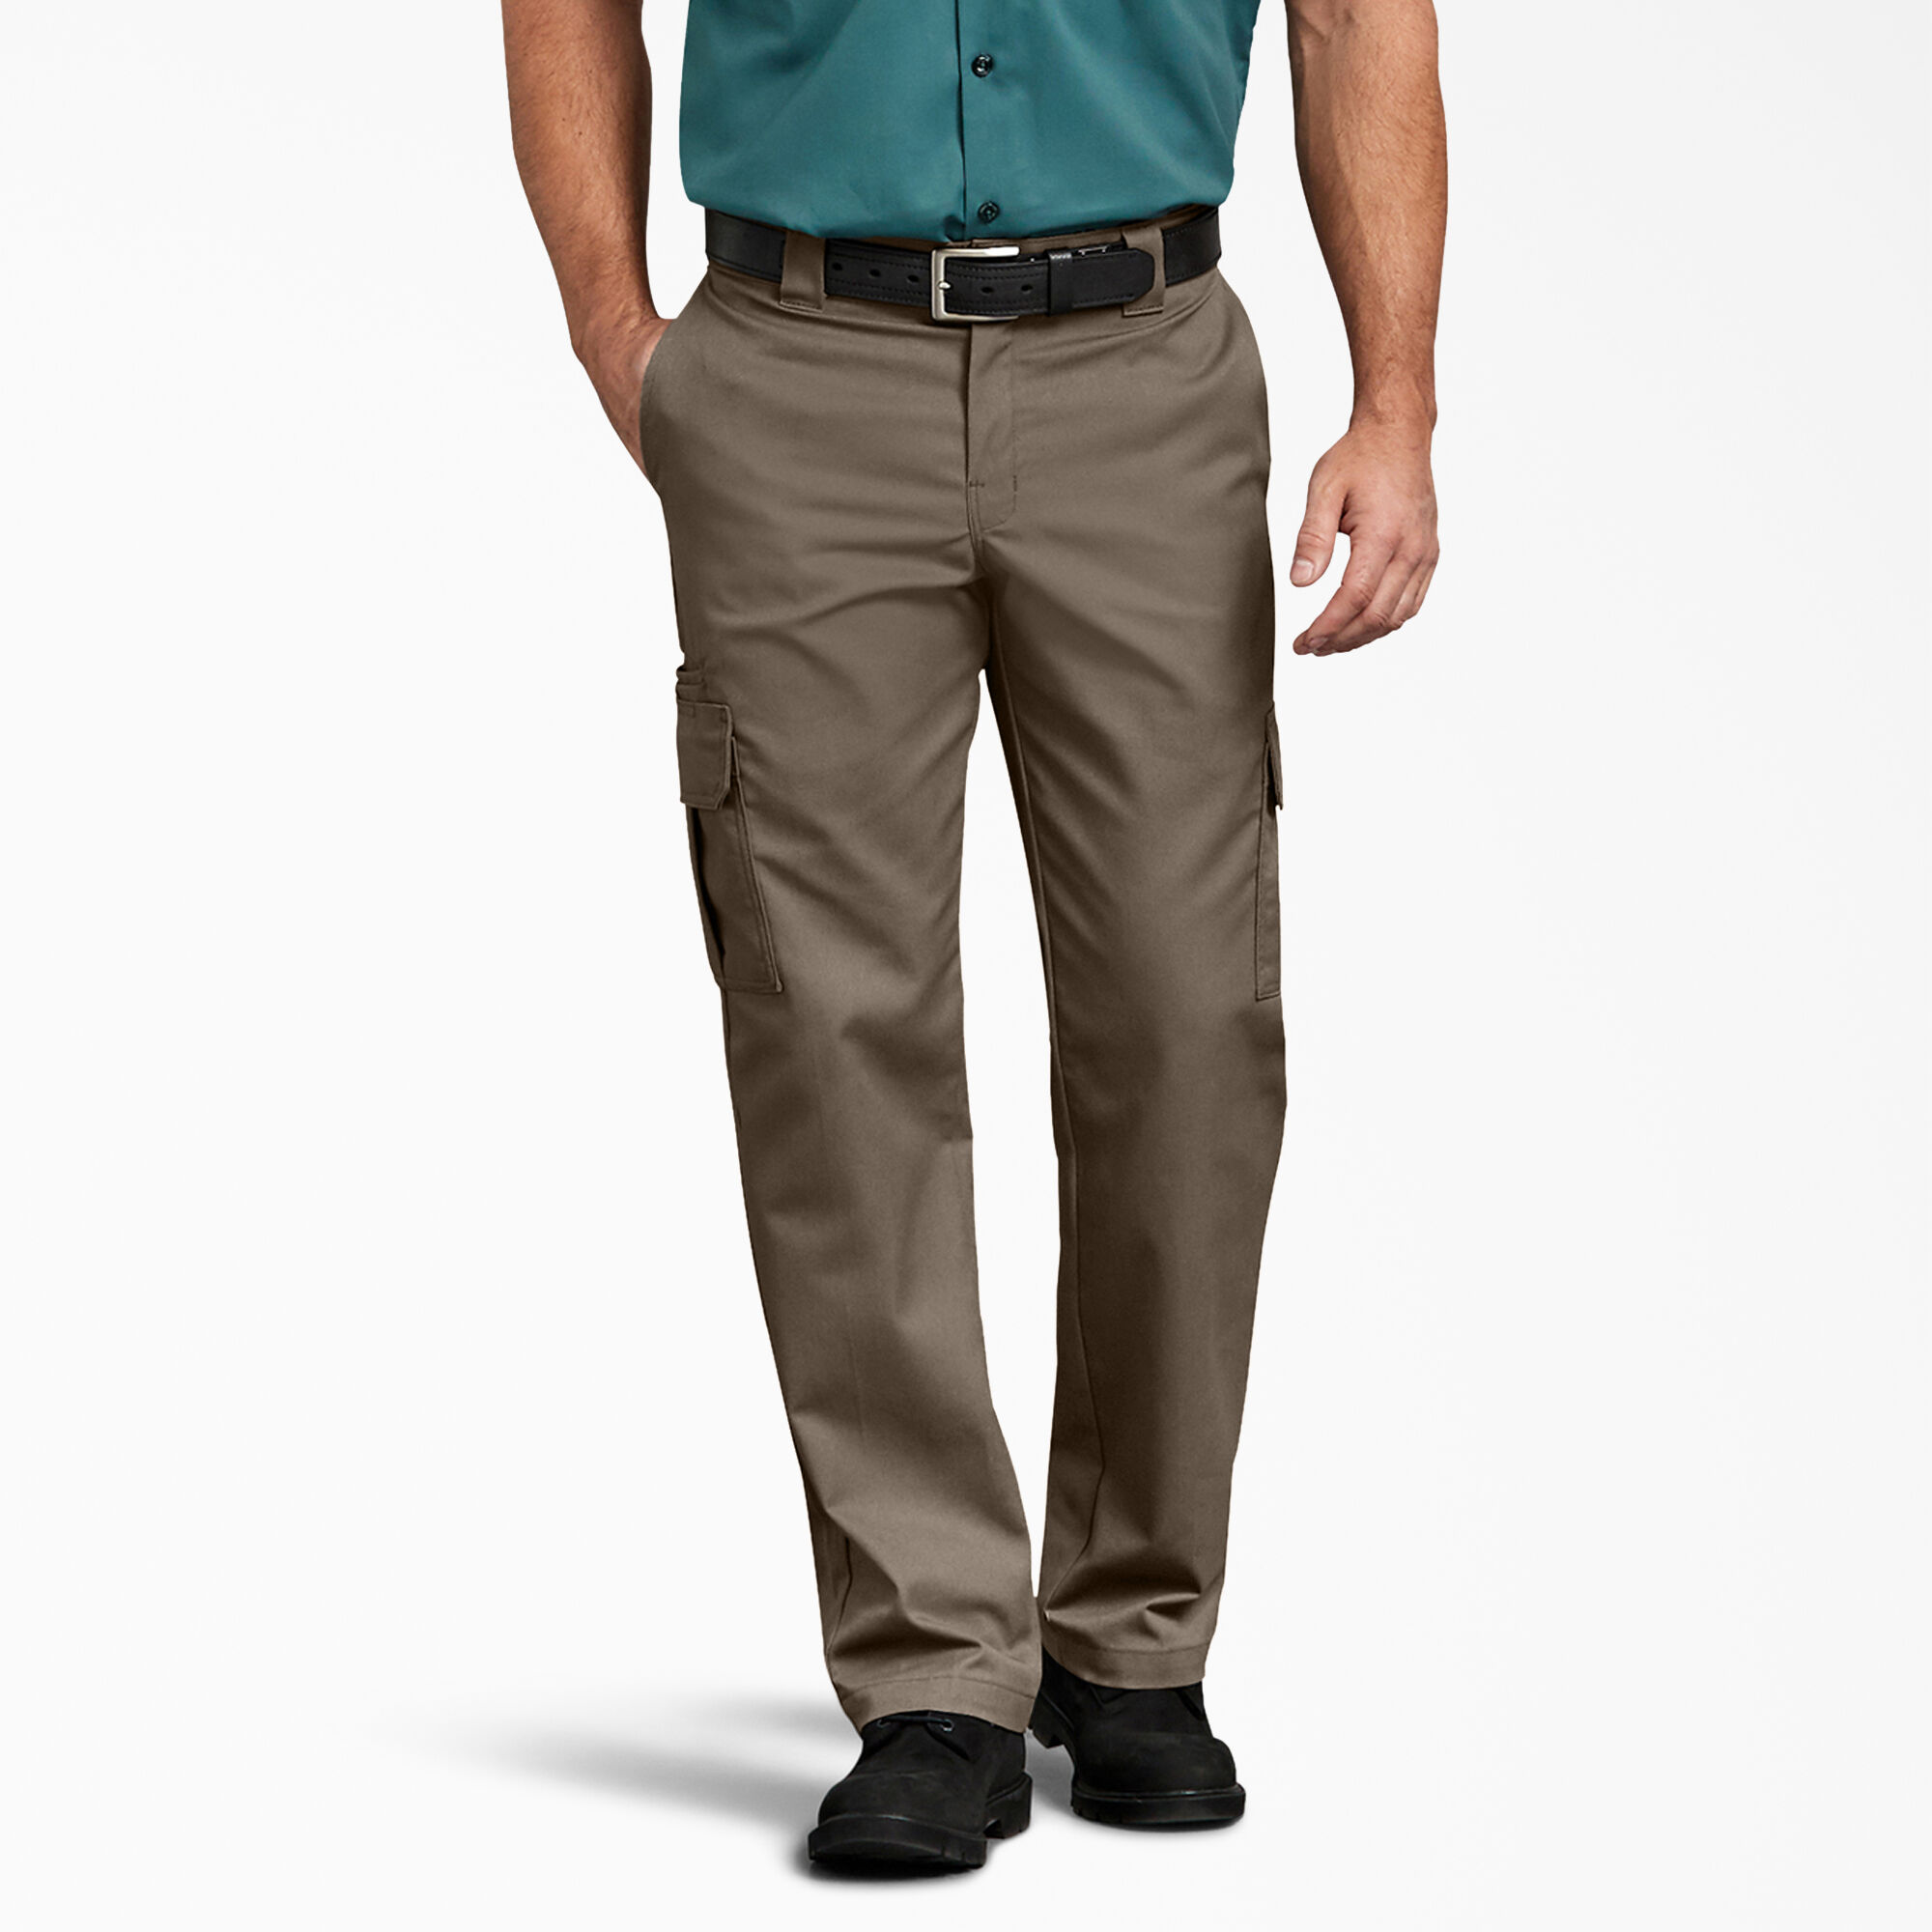 softwill cargo pants